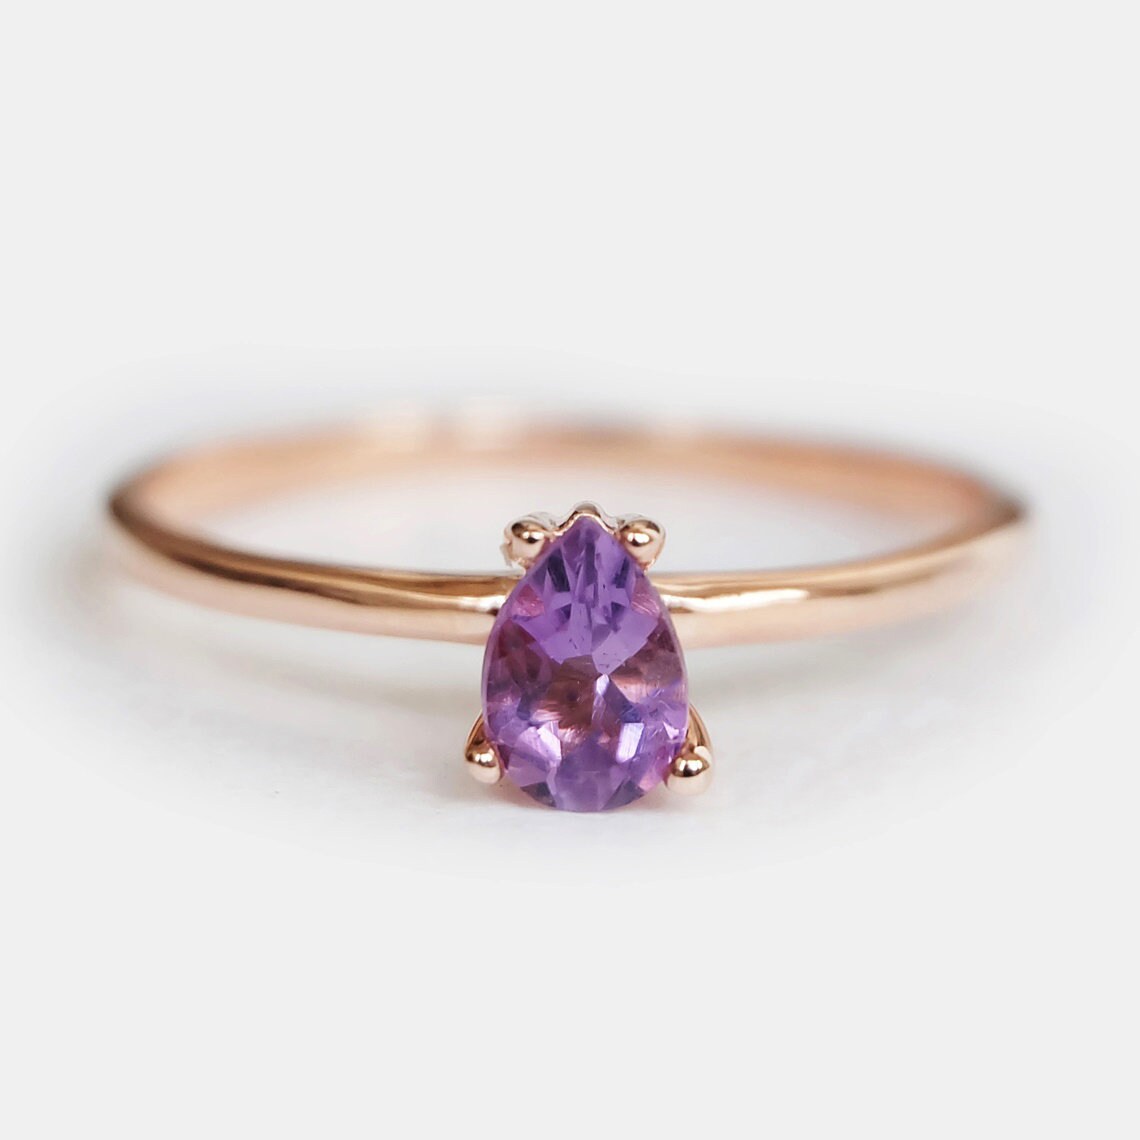 Amethyst Solitaire Ring - 14k Rose Gold Vermeil Ring